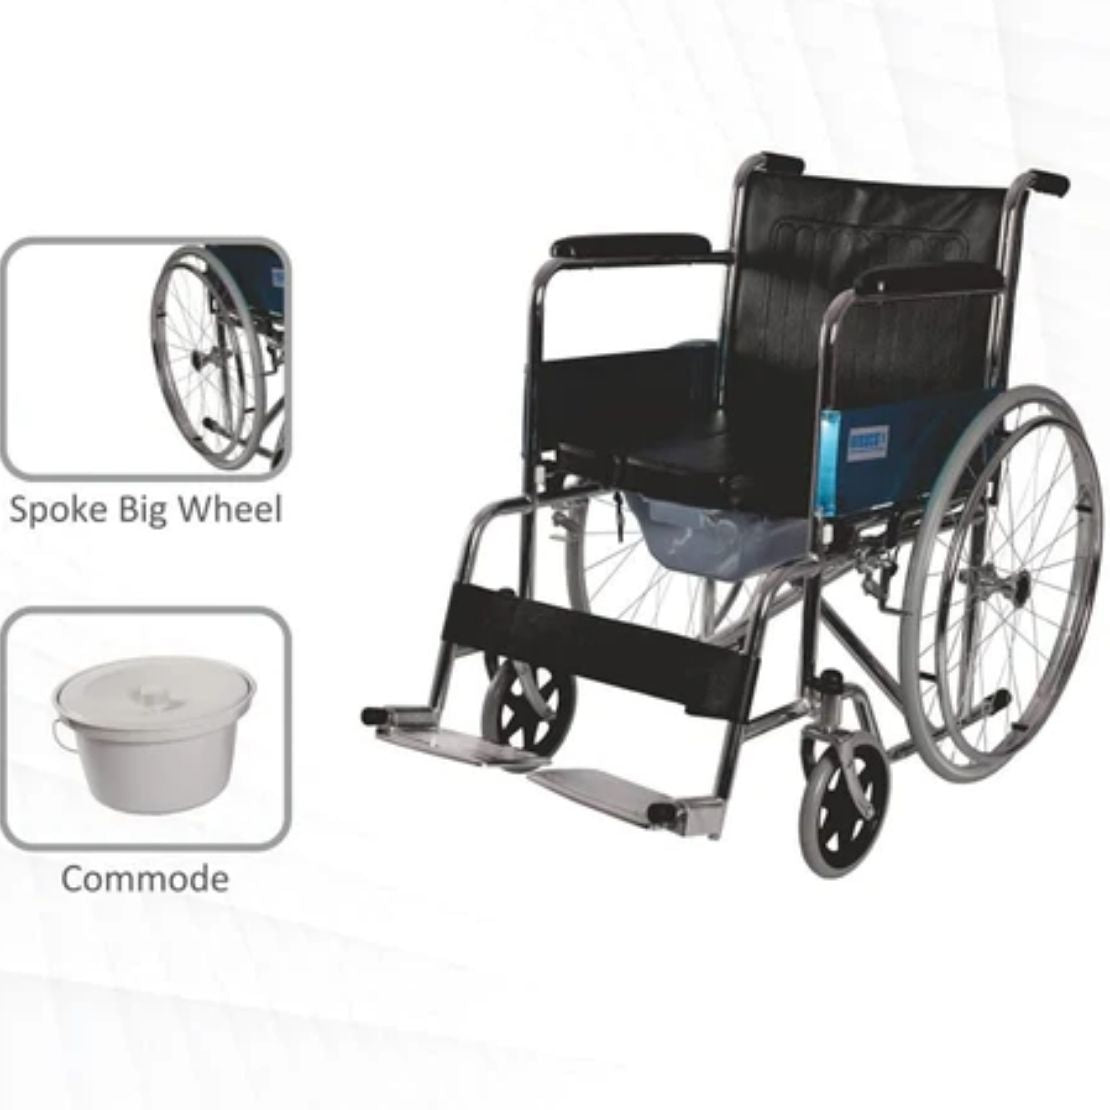 Uphealthy Wheel chair with Commode/toilet pot